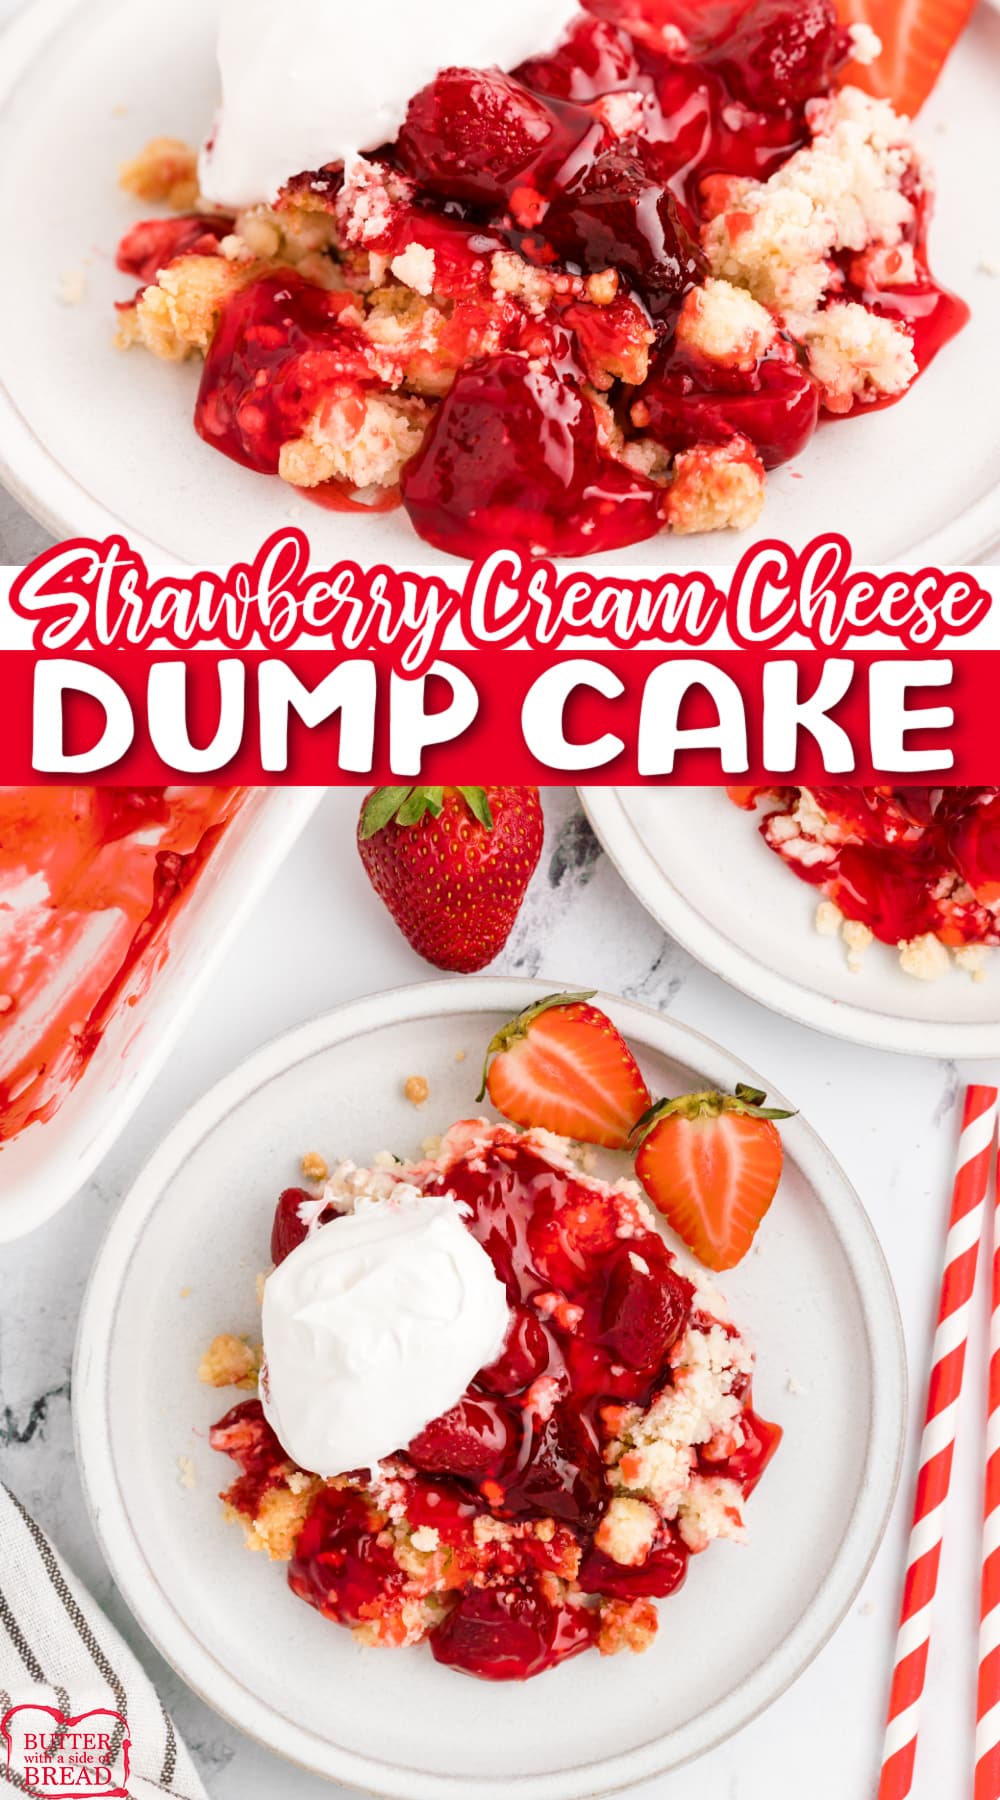 Strawberry Cream Cheese Dump Cake made with only 4 ingredients! This simple dump cake recipe is made with a cake mix, butter, strawberry pie filling and whipped cream cheese.